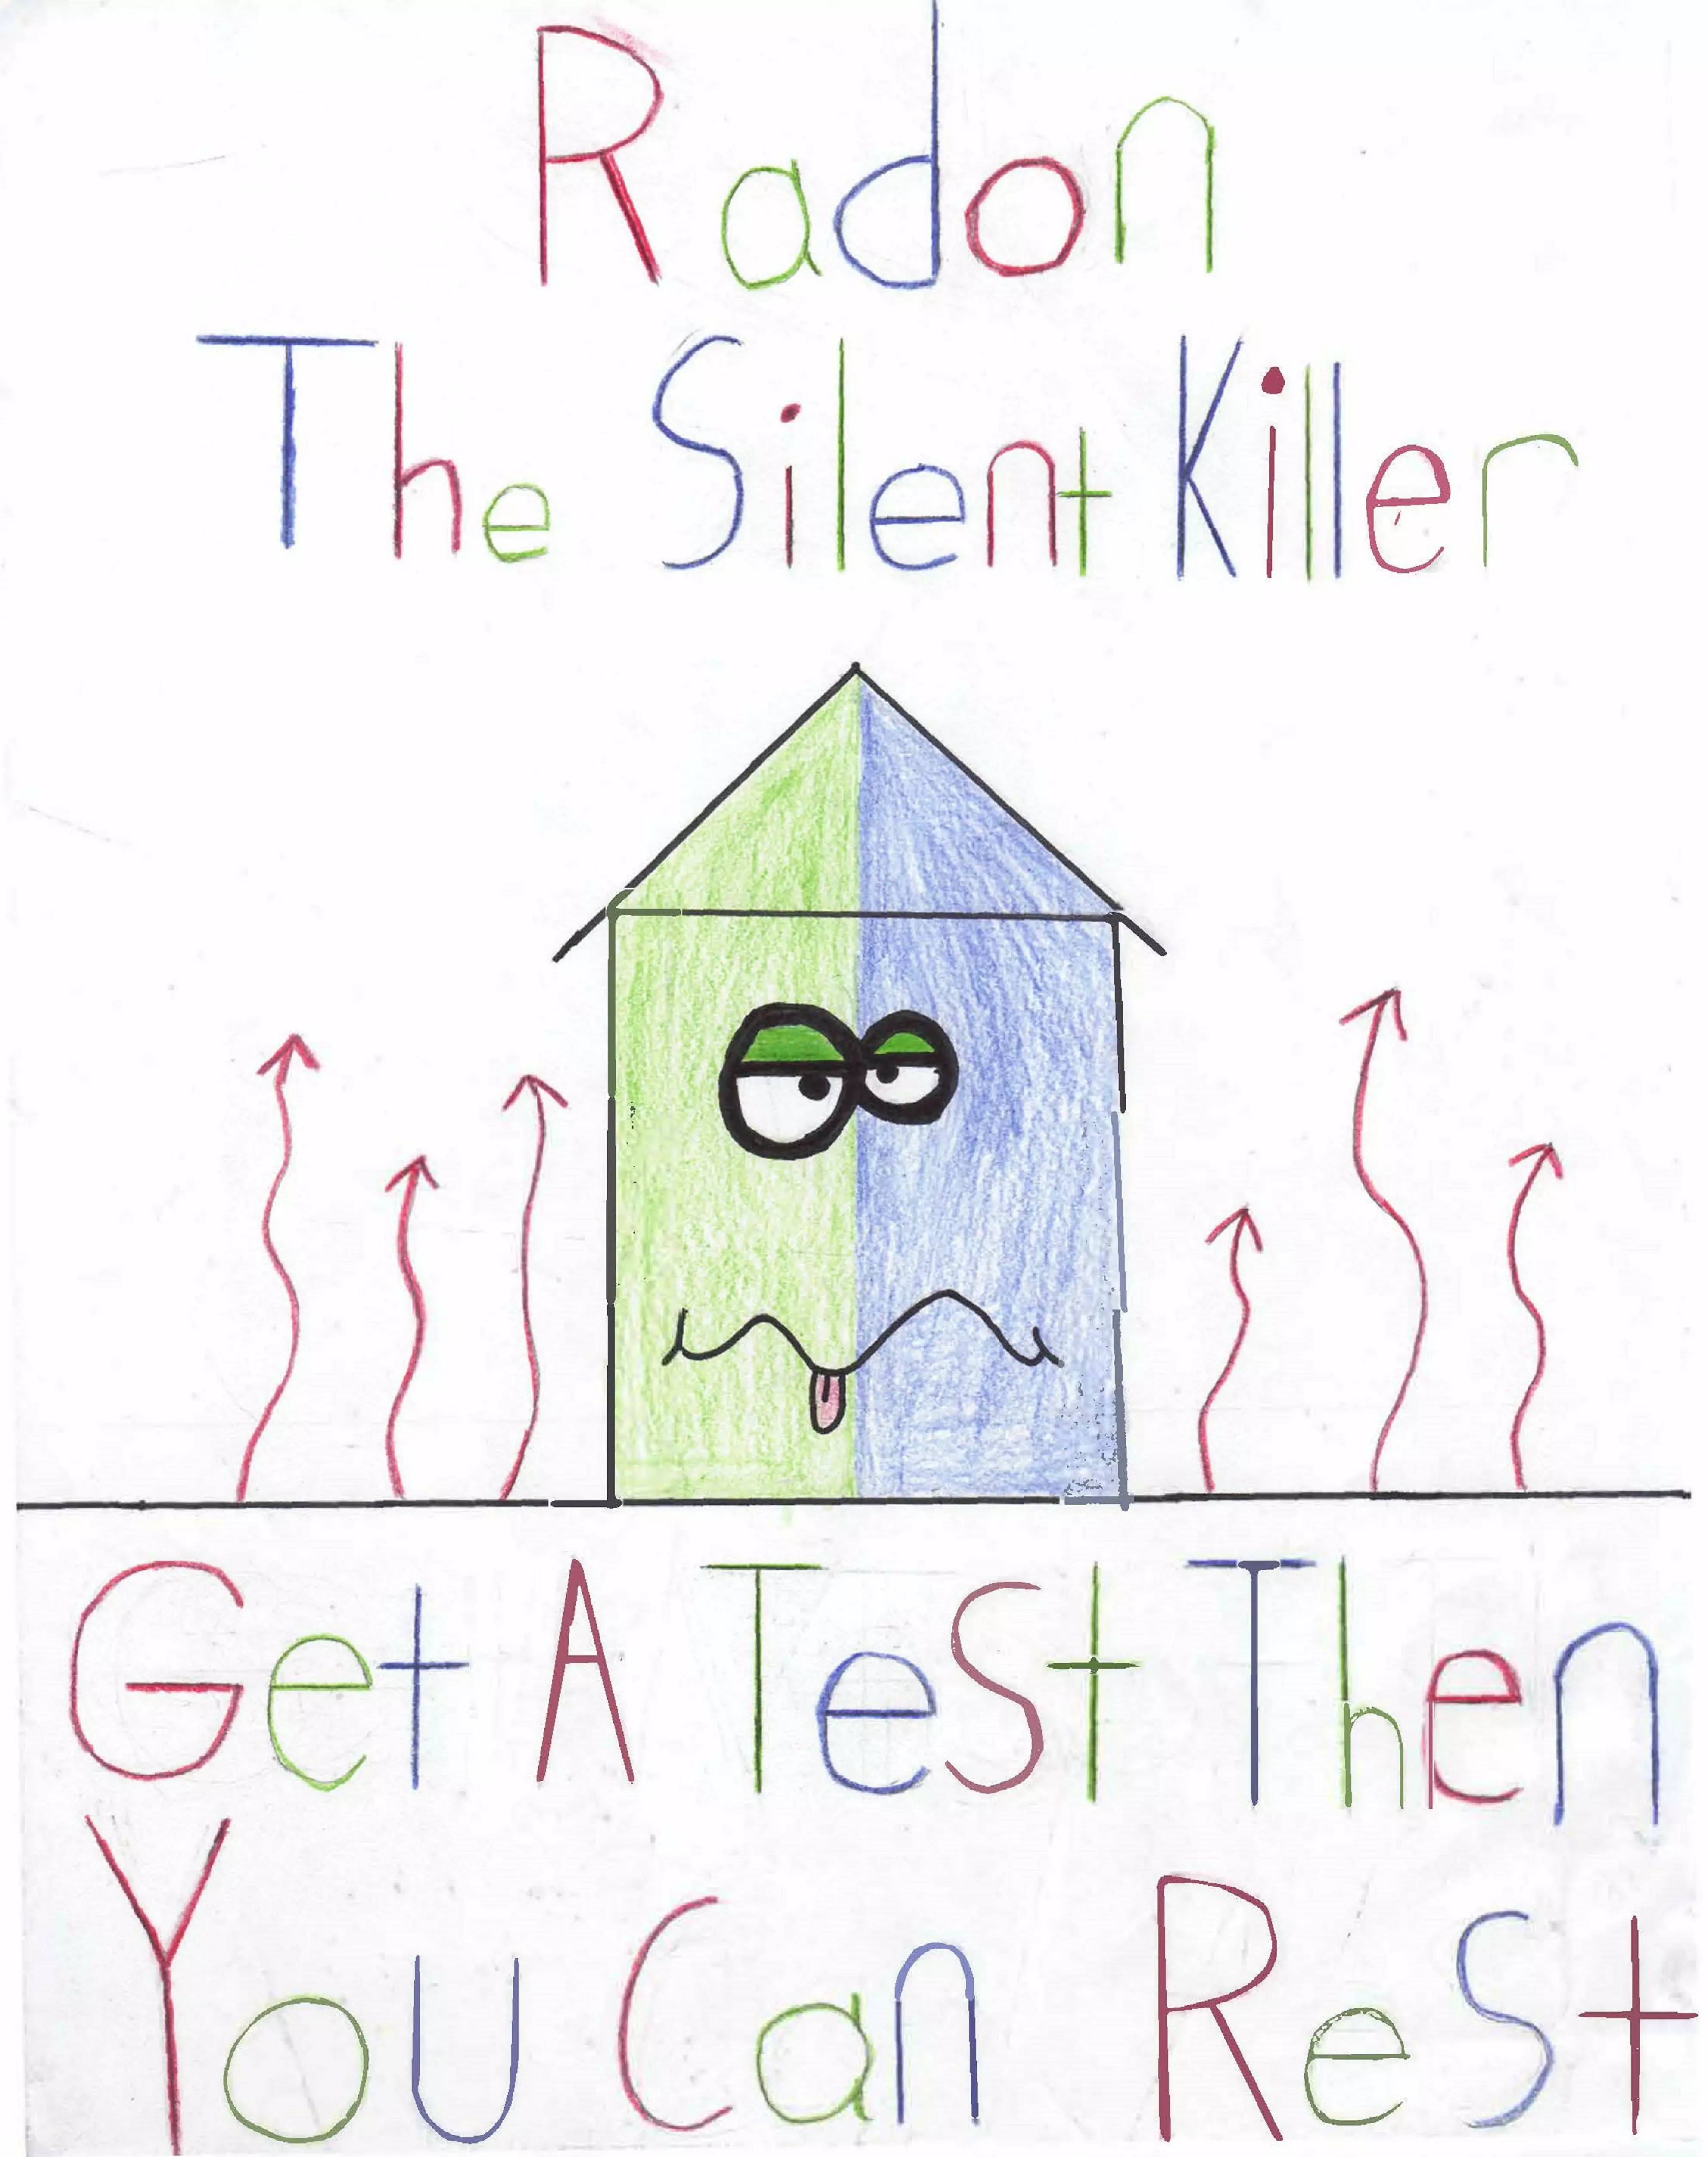 Radon the silent killer. Get a test then you can rest. With a drawing of a house with a sick looking face.